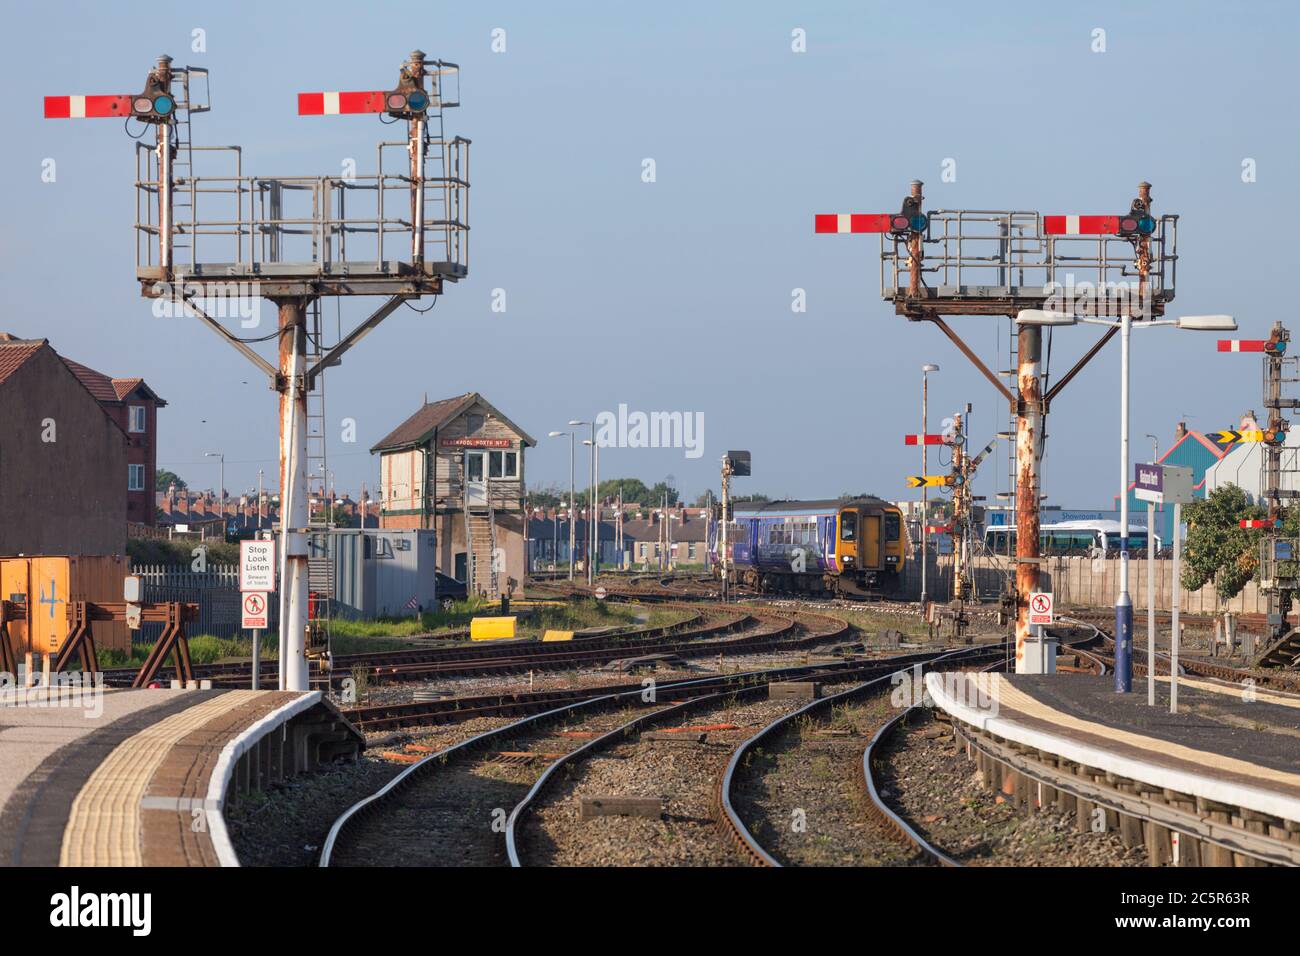 Northern Rail class 156 sprinter train arriving at Blackpool North railway station with the mechanical semaphore home and distant railway signals Stock Photo